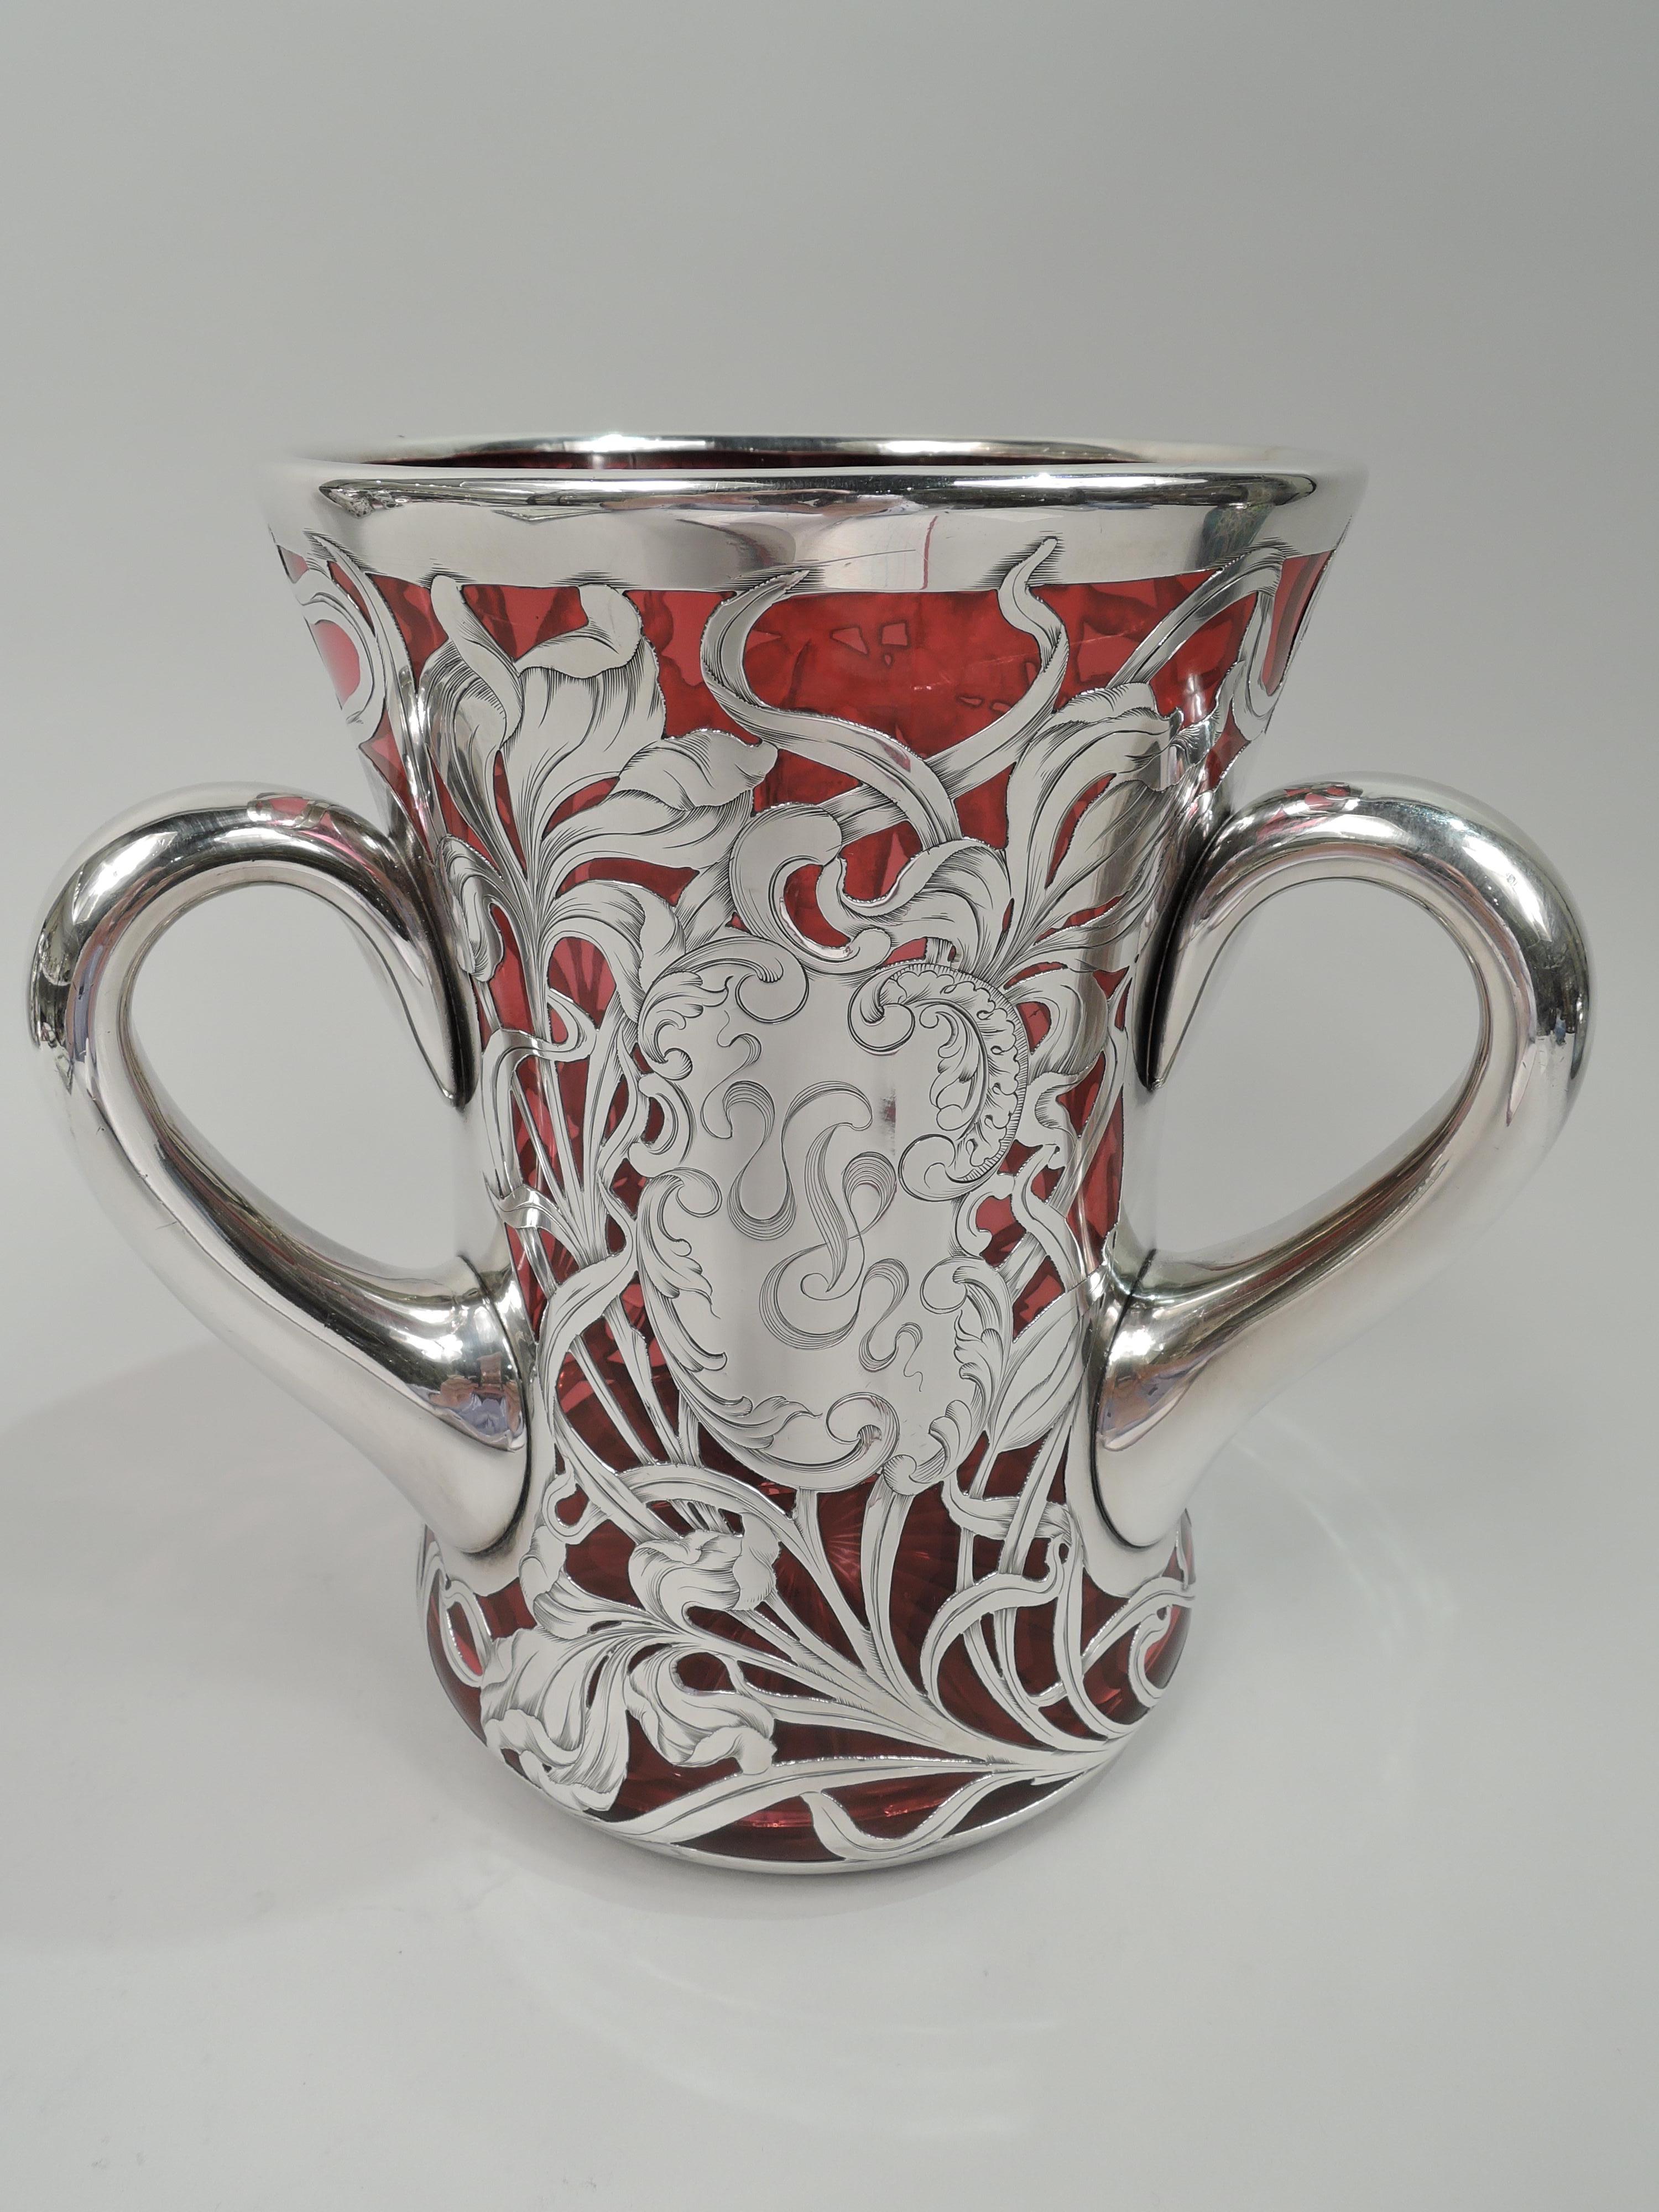 American Gorgeous Antique Art Nouveau Red Silver Overlay Loving Cup Vase